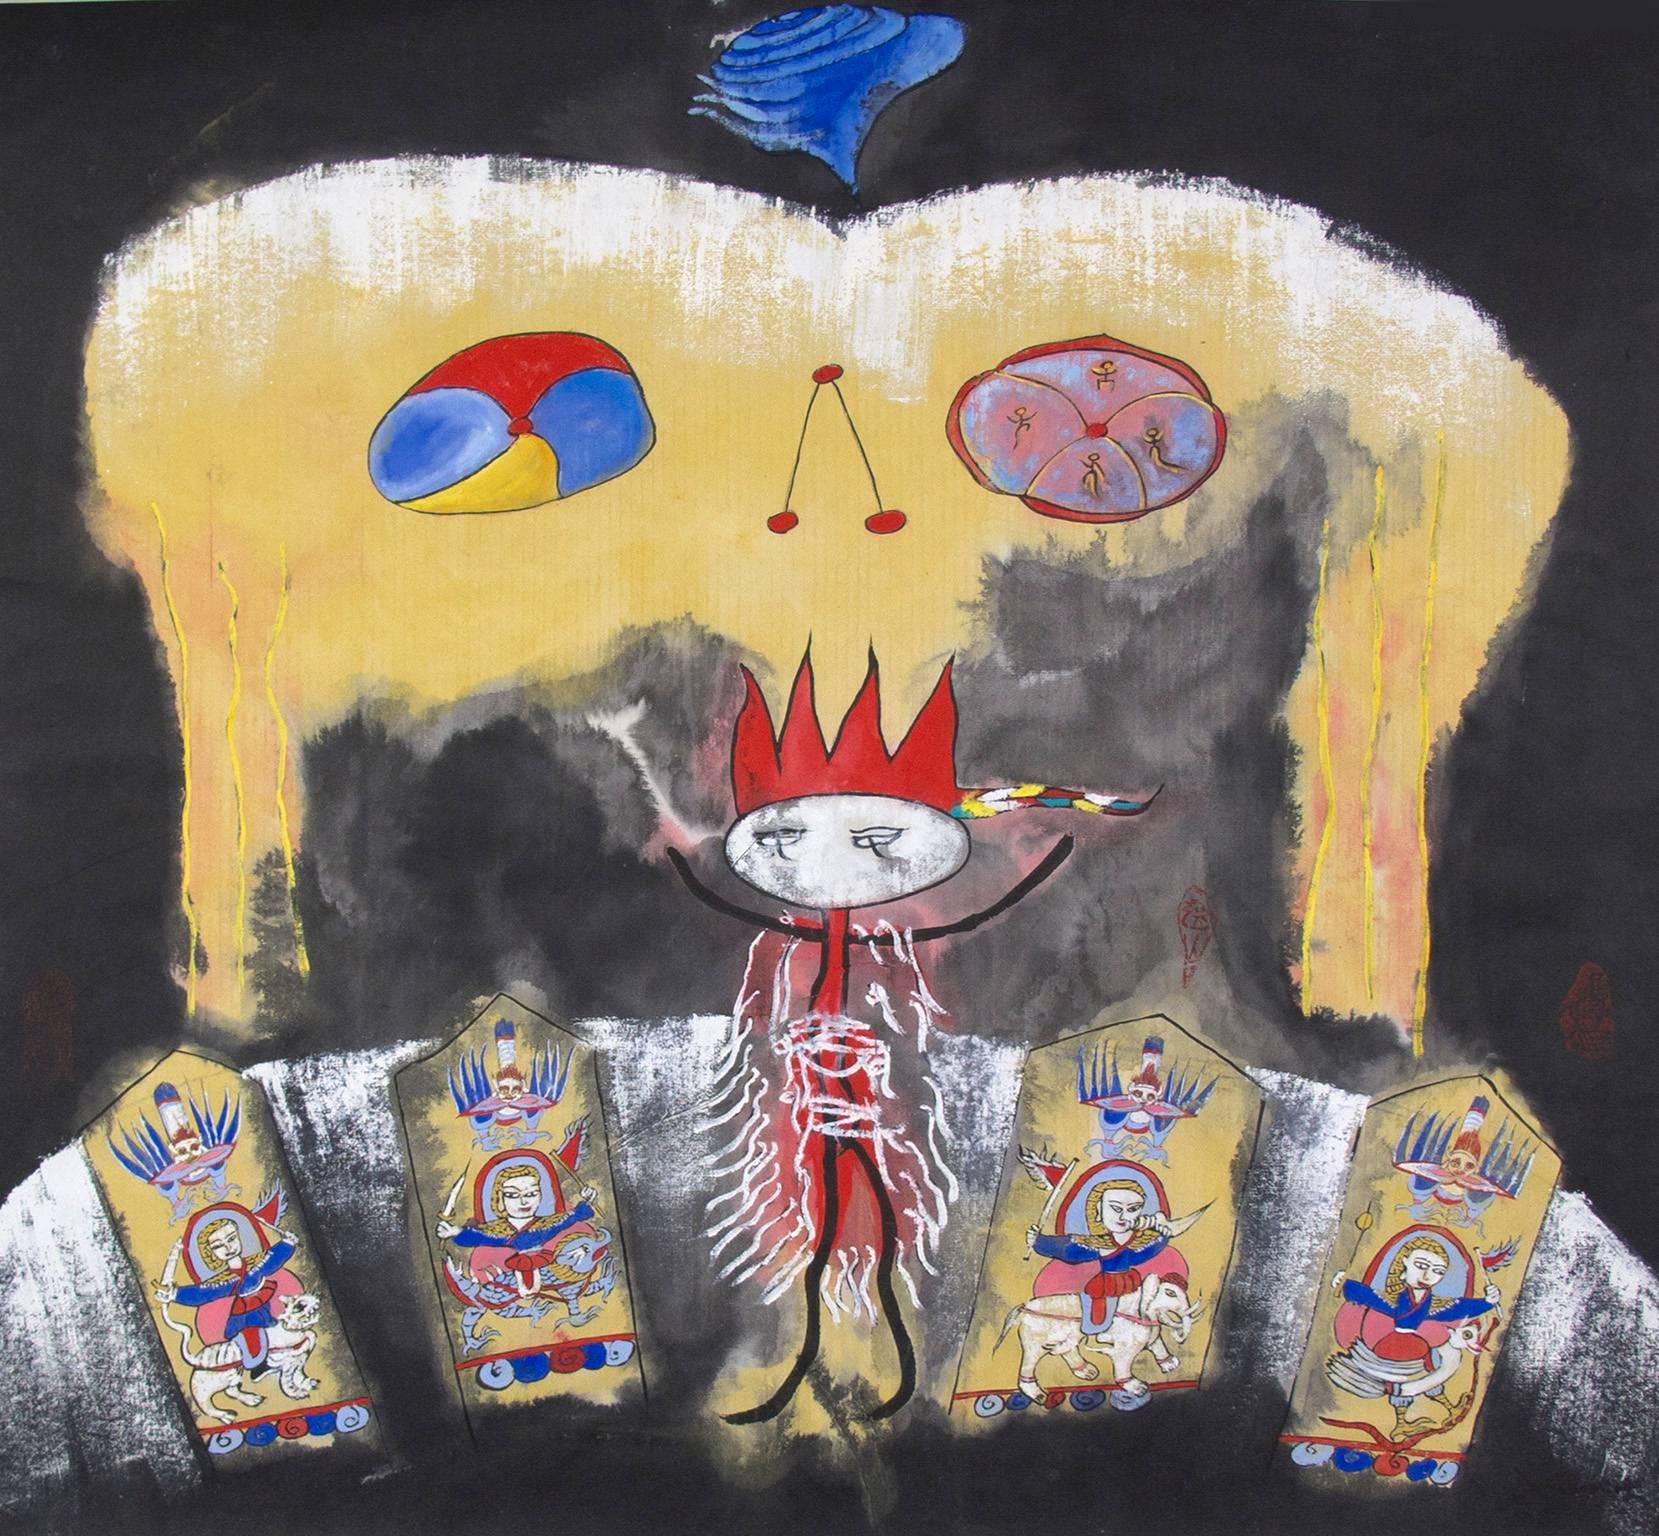 "Sky Mask 2"  is a mixed media piece on paper signed by the artist Xiao Ming. It depicts a variety of surreal and abstracted figures in red, blue, and yellow. 

34 1/4" x 34" art

Born in the Yunnan province of China, close to Tibet, Xiao Ming